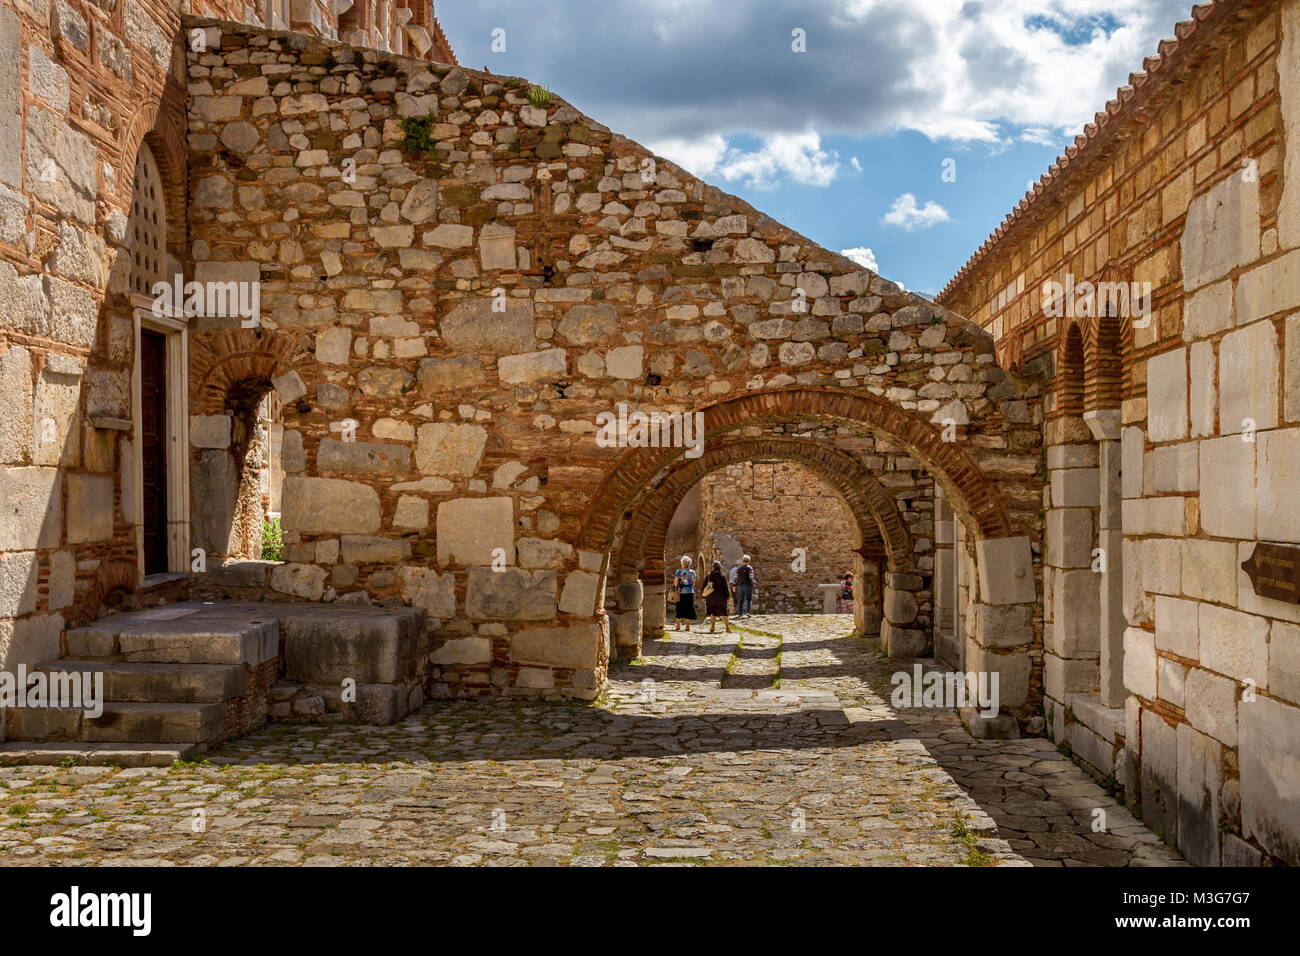 At the byzantine monastery of Hosios Loukas, in Boeotia region, central Greece. Stock Photo